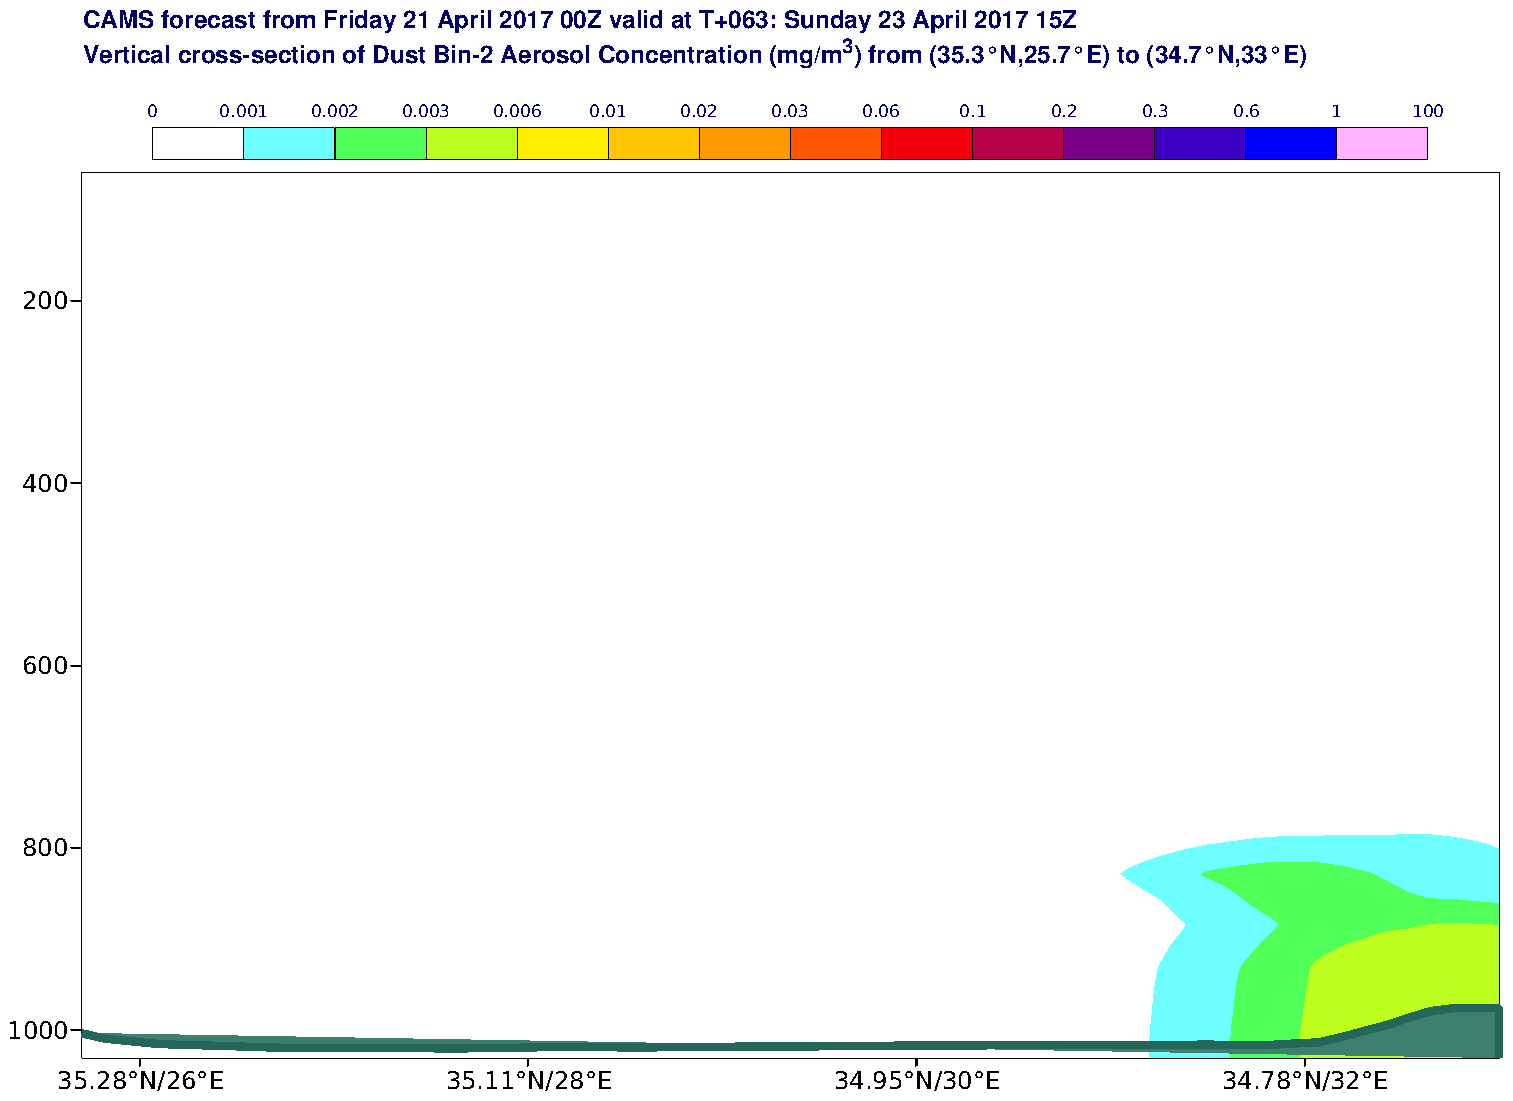 Vertical cross-section of Dust Bin-2 Aerosol Concentration (mg/m3) valid at T63 - 2017-04-23 15:00